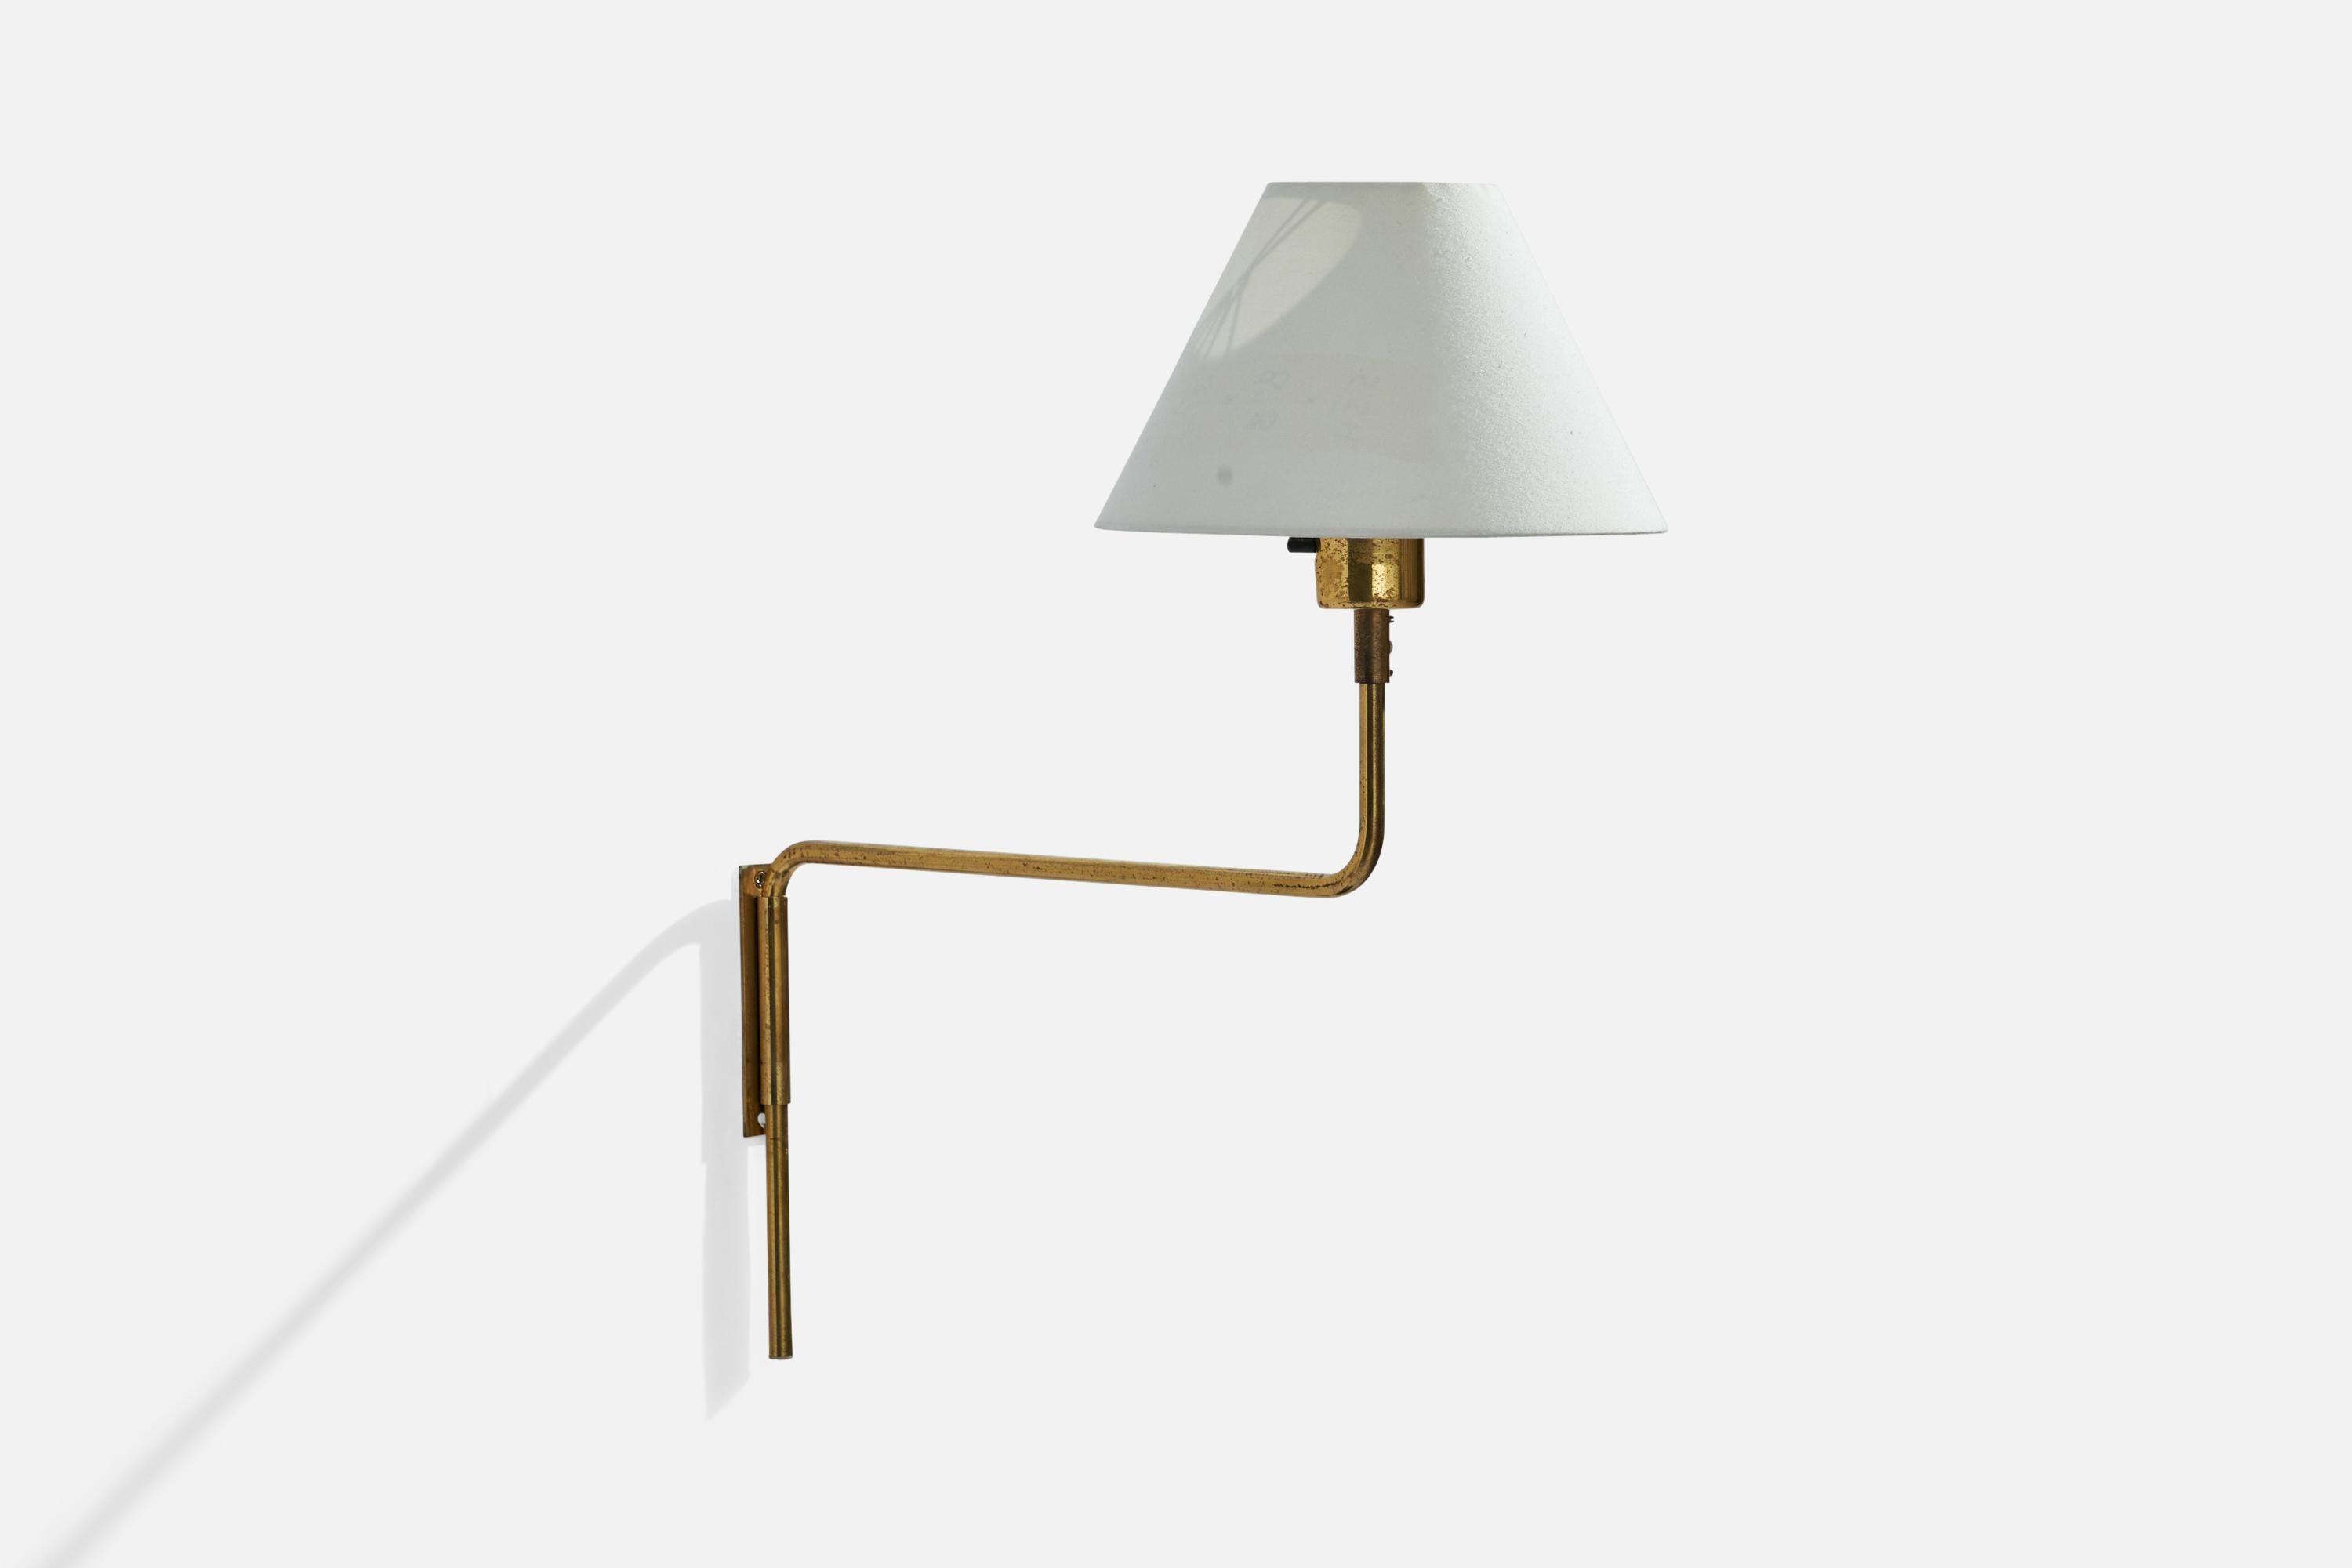 An adjustable brass and white fabric wall light designed and produced in Denmark, 1940s.

Overall Dimensions (inches): 16” H x 12.5” W x 16” D
Back Plate Dimensions (inches): 4”  H x .75” W x .25”  D
Bulb Specifications: E-26 Bulb
Number of Sockets: